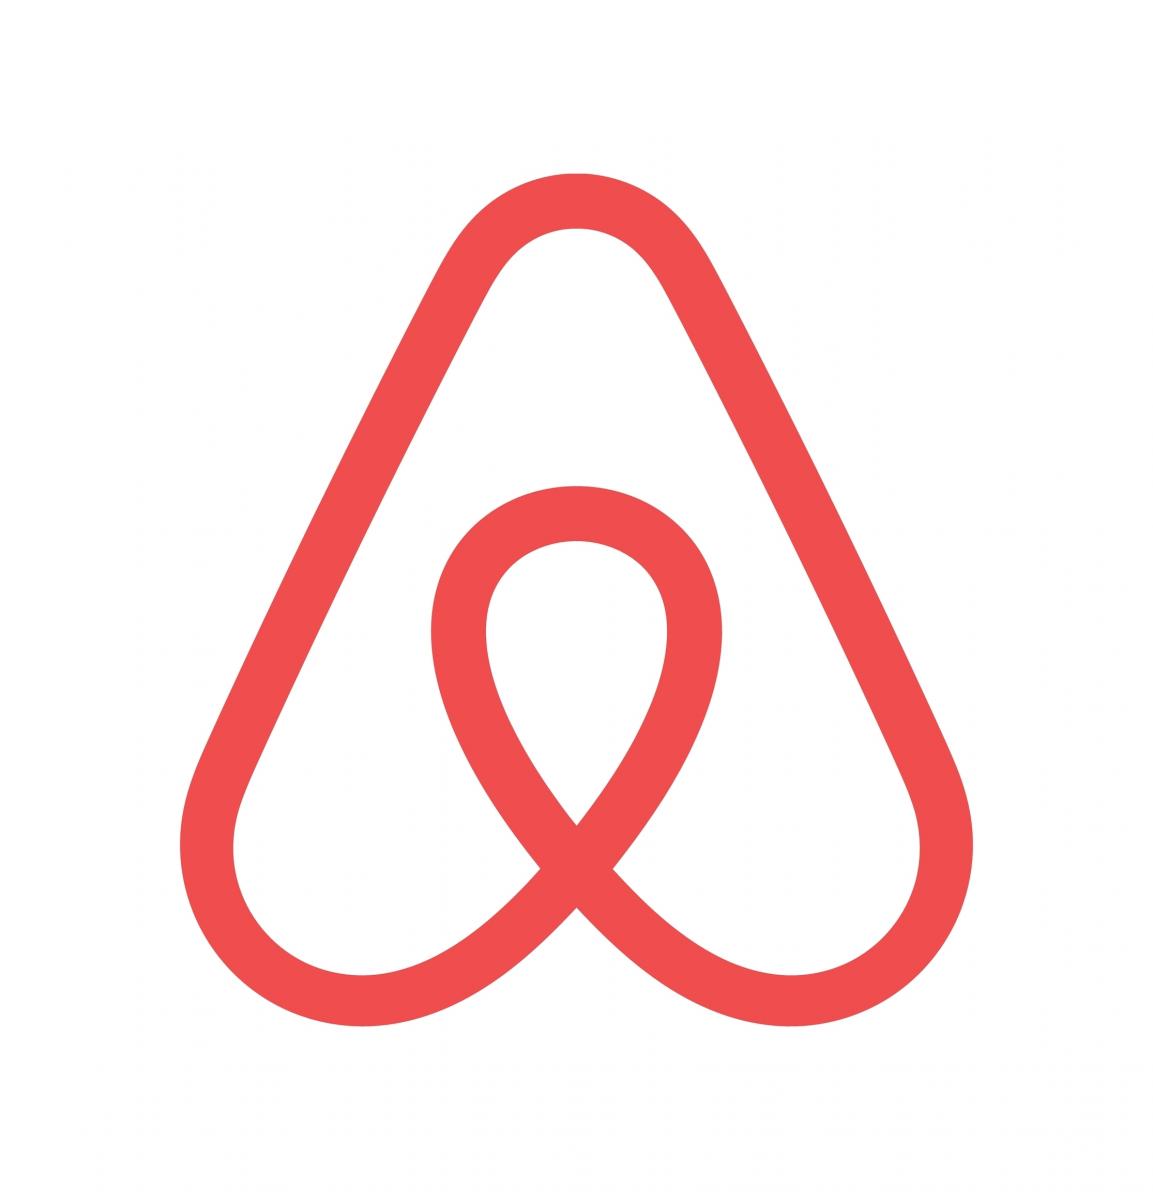 Airbnb regulation hugely unpopular - government consultation results